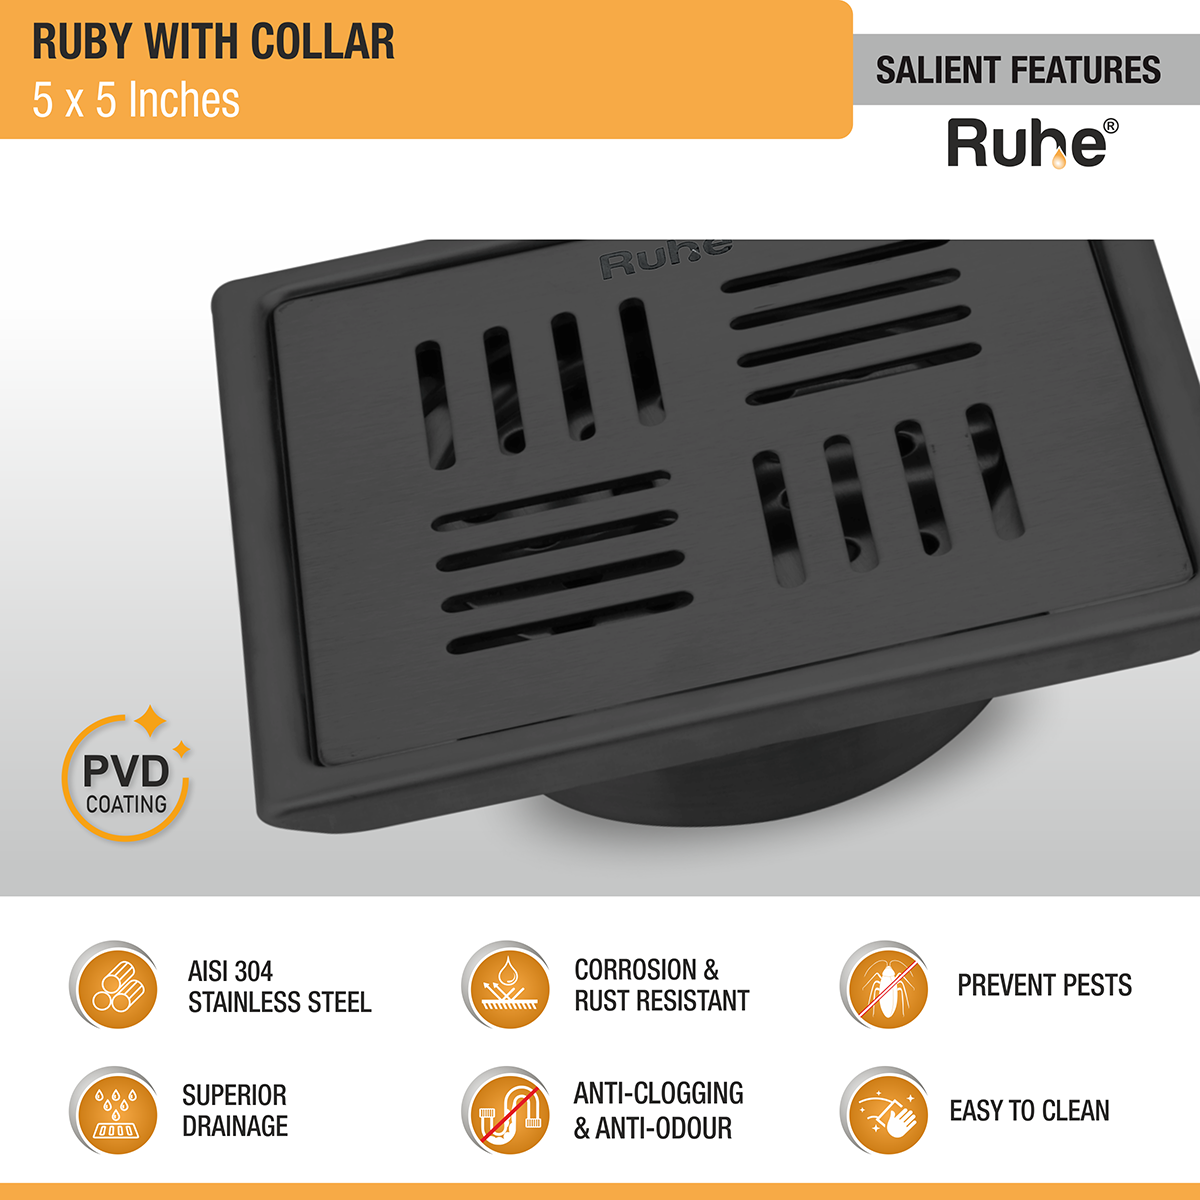 Ruby Square 304-Grade Floor Drain in Black PVD Coating (5 x 5 Inches) features and benefits